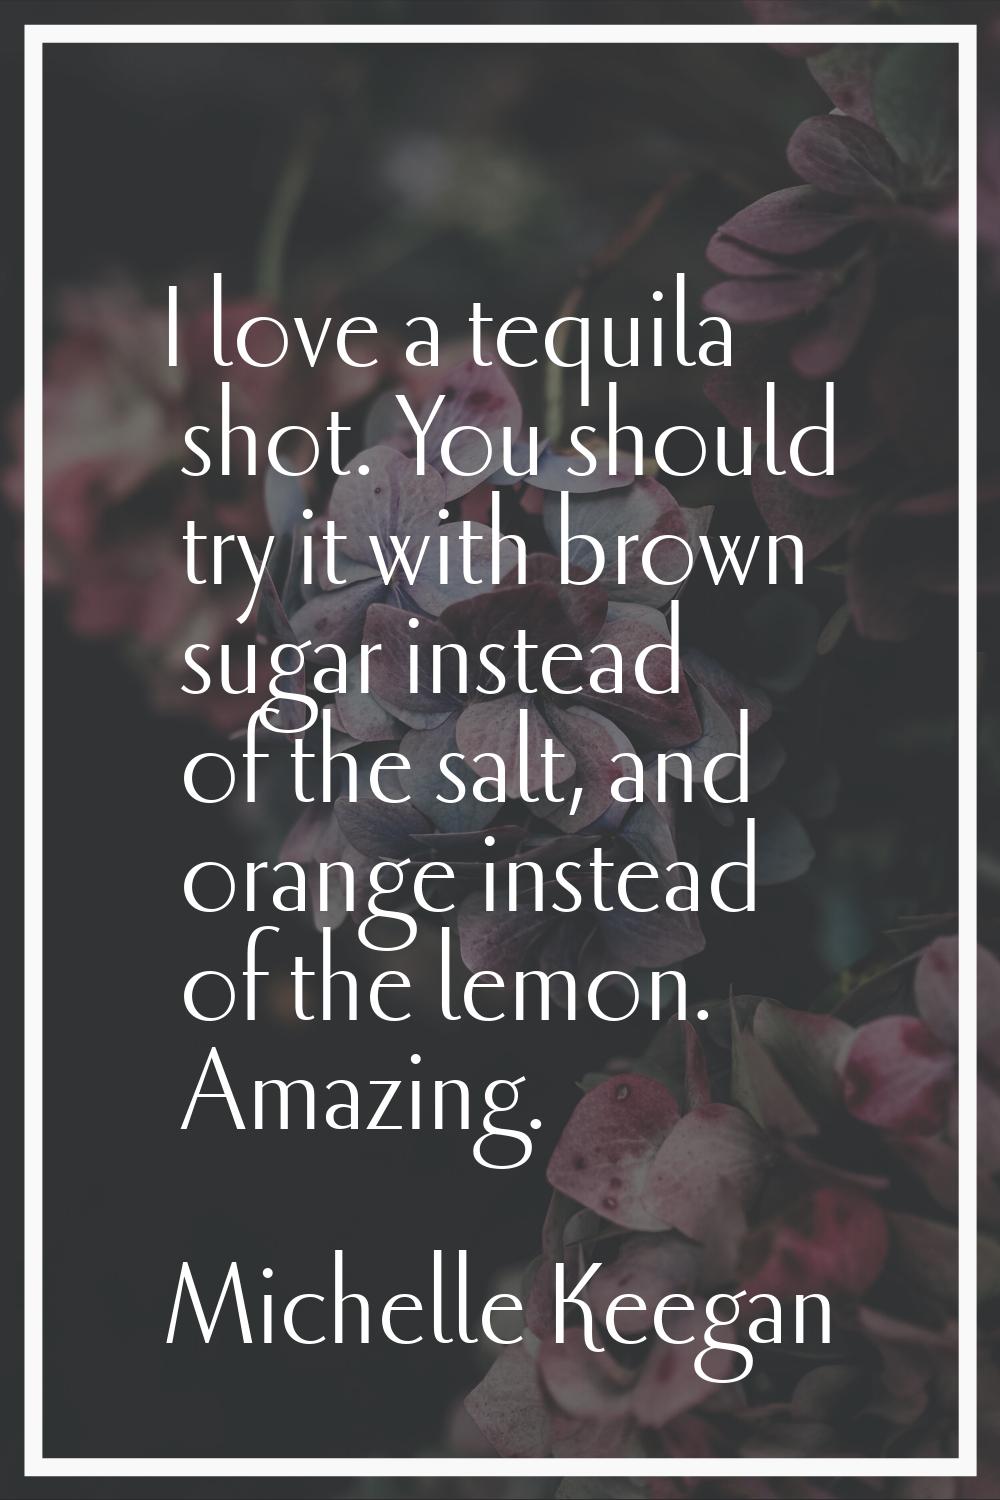 I love a tequila shot. You should try it with brown sugar instead of the salt, and orange instead o